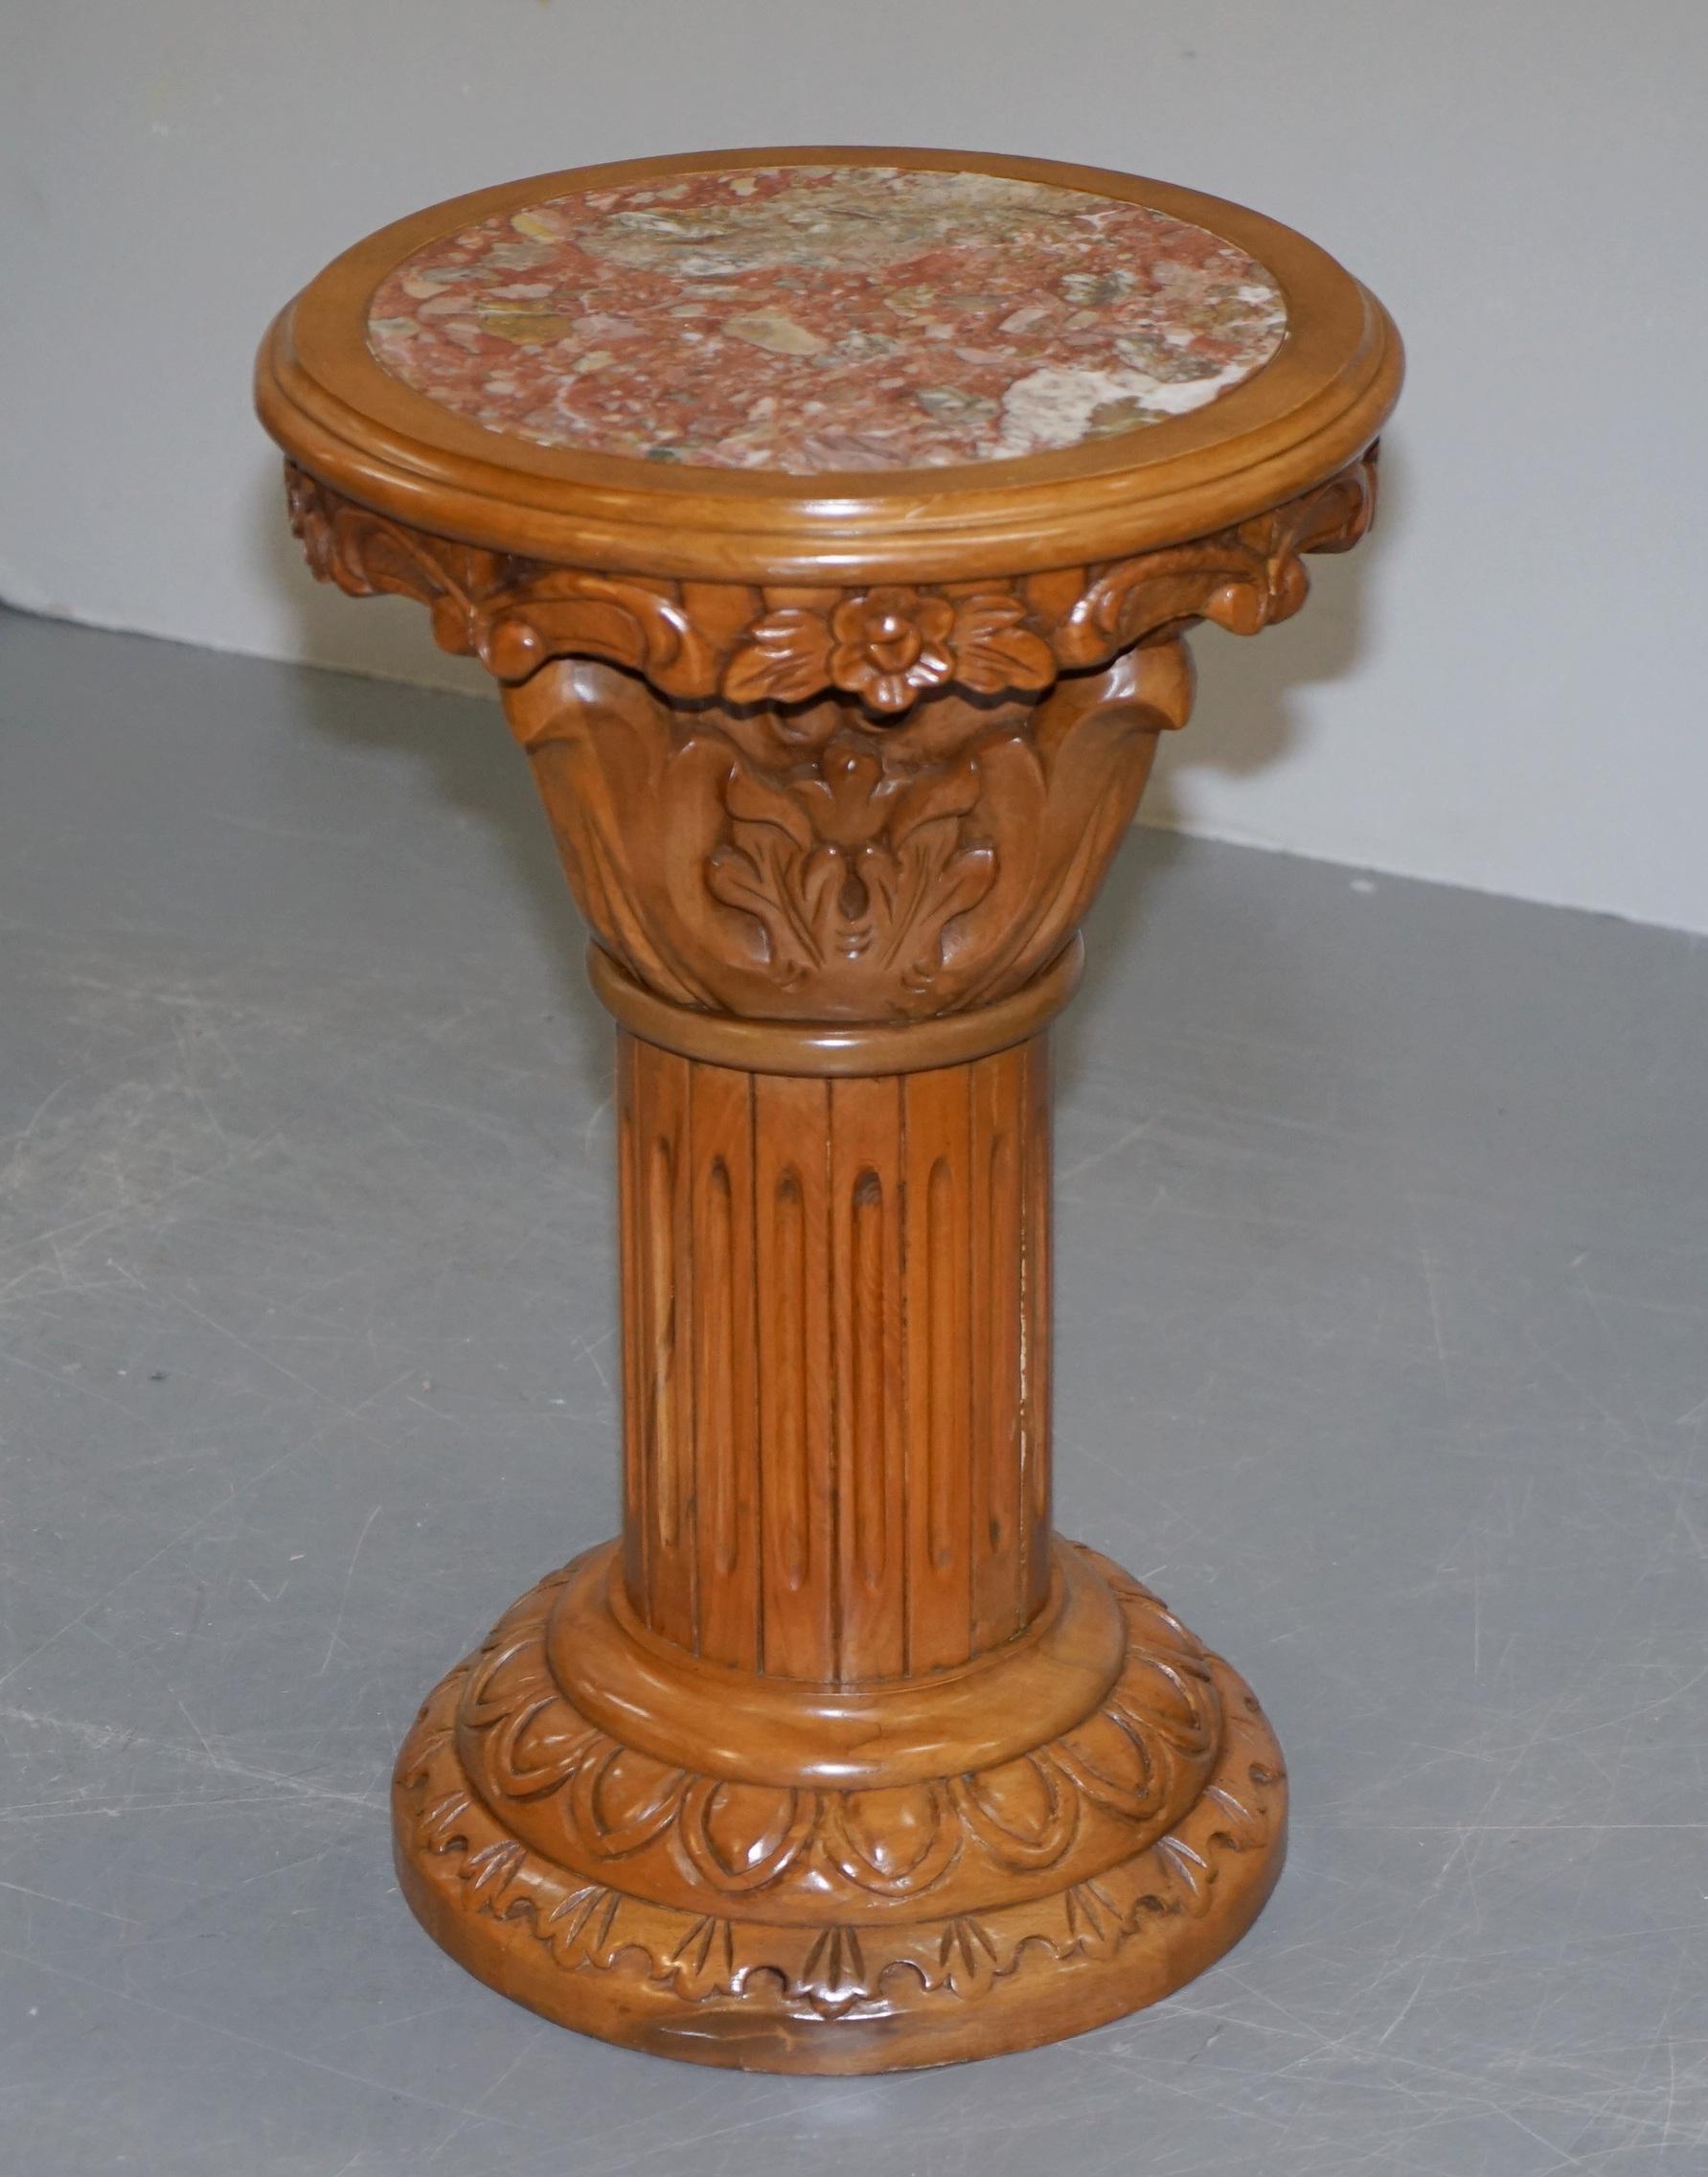 We are delighted to offer for sale a good looking and well made vintage hardwood pedestal jardinière stand with Italian marble top

A decorative piece which is very utilitarian, naturally designed for plants, antiques or simply as a good